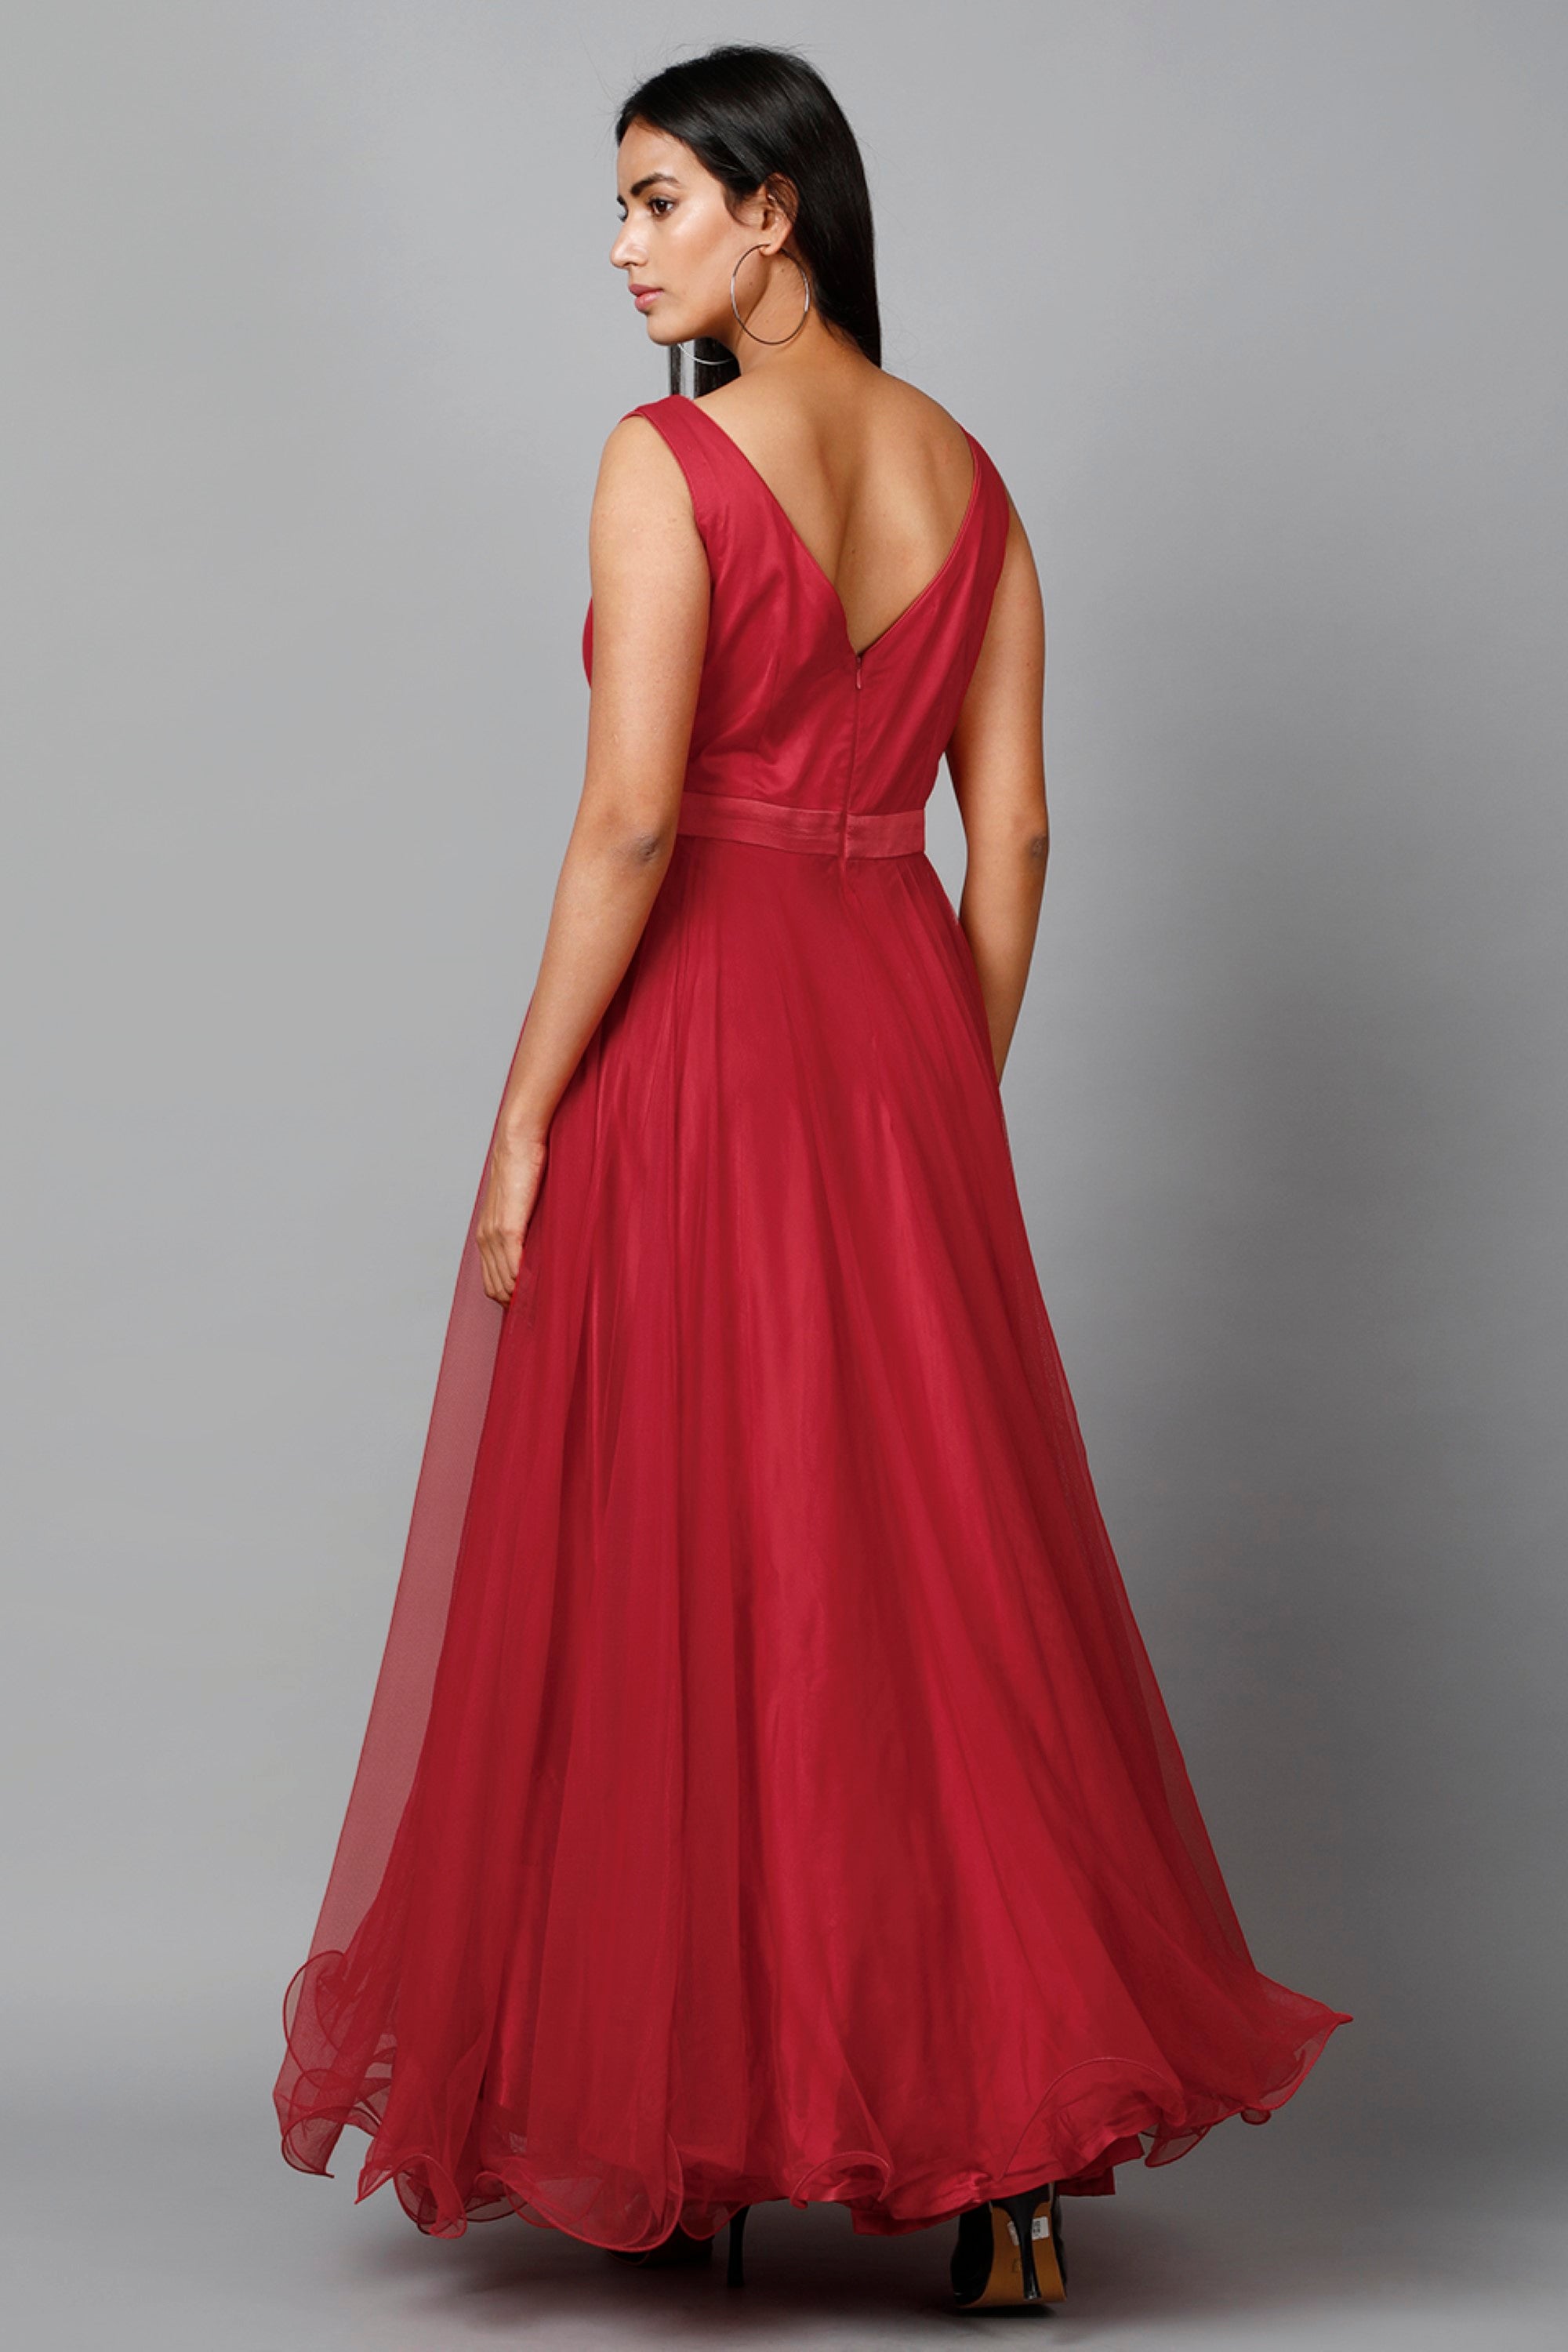 Women's Red Net Bridesmaid Embroidered Gown  - MIRACOLOS by Ruchi